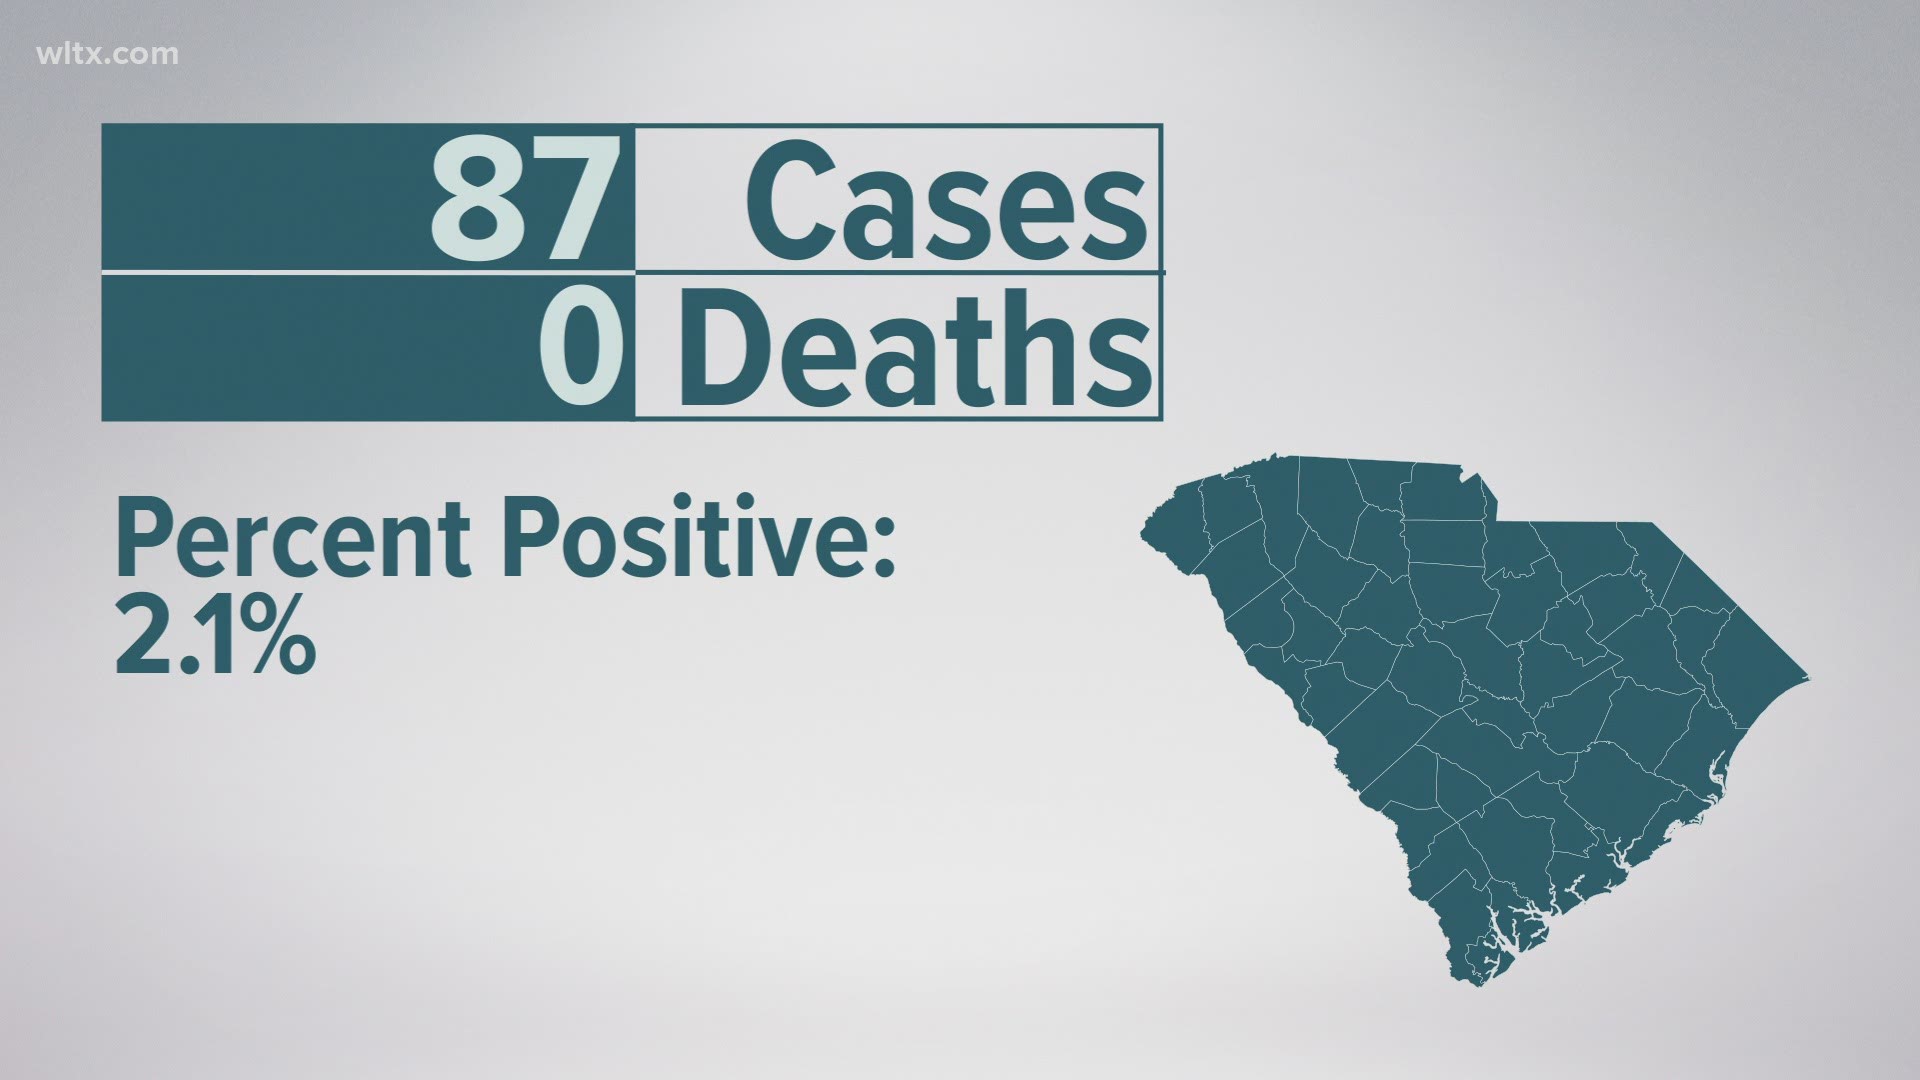 DHEC reported the lowest number of new COVID cases in SC in more than a year on Tuesday.